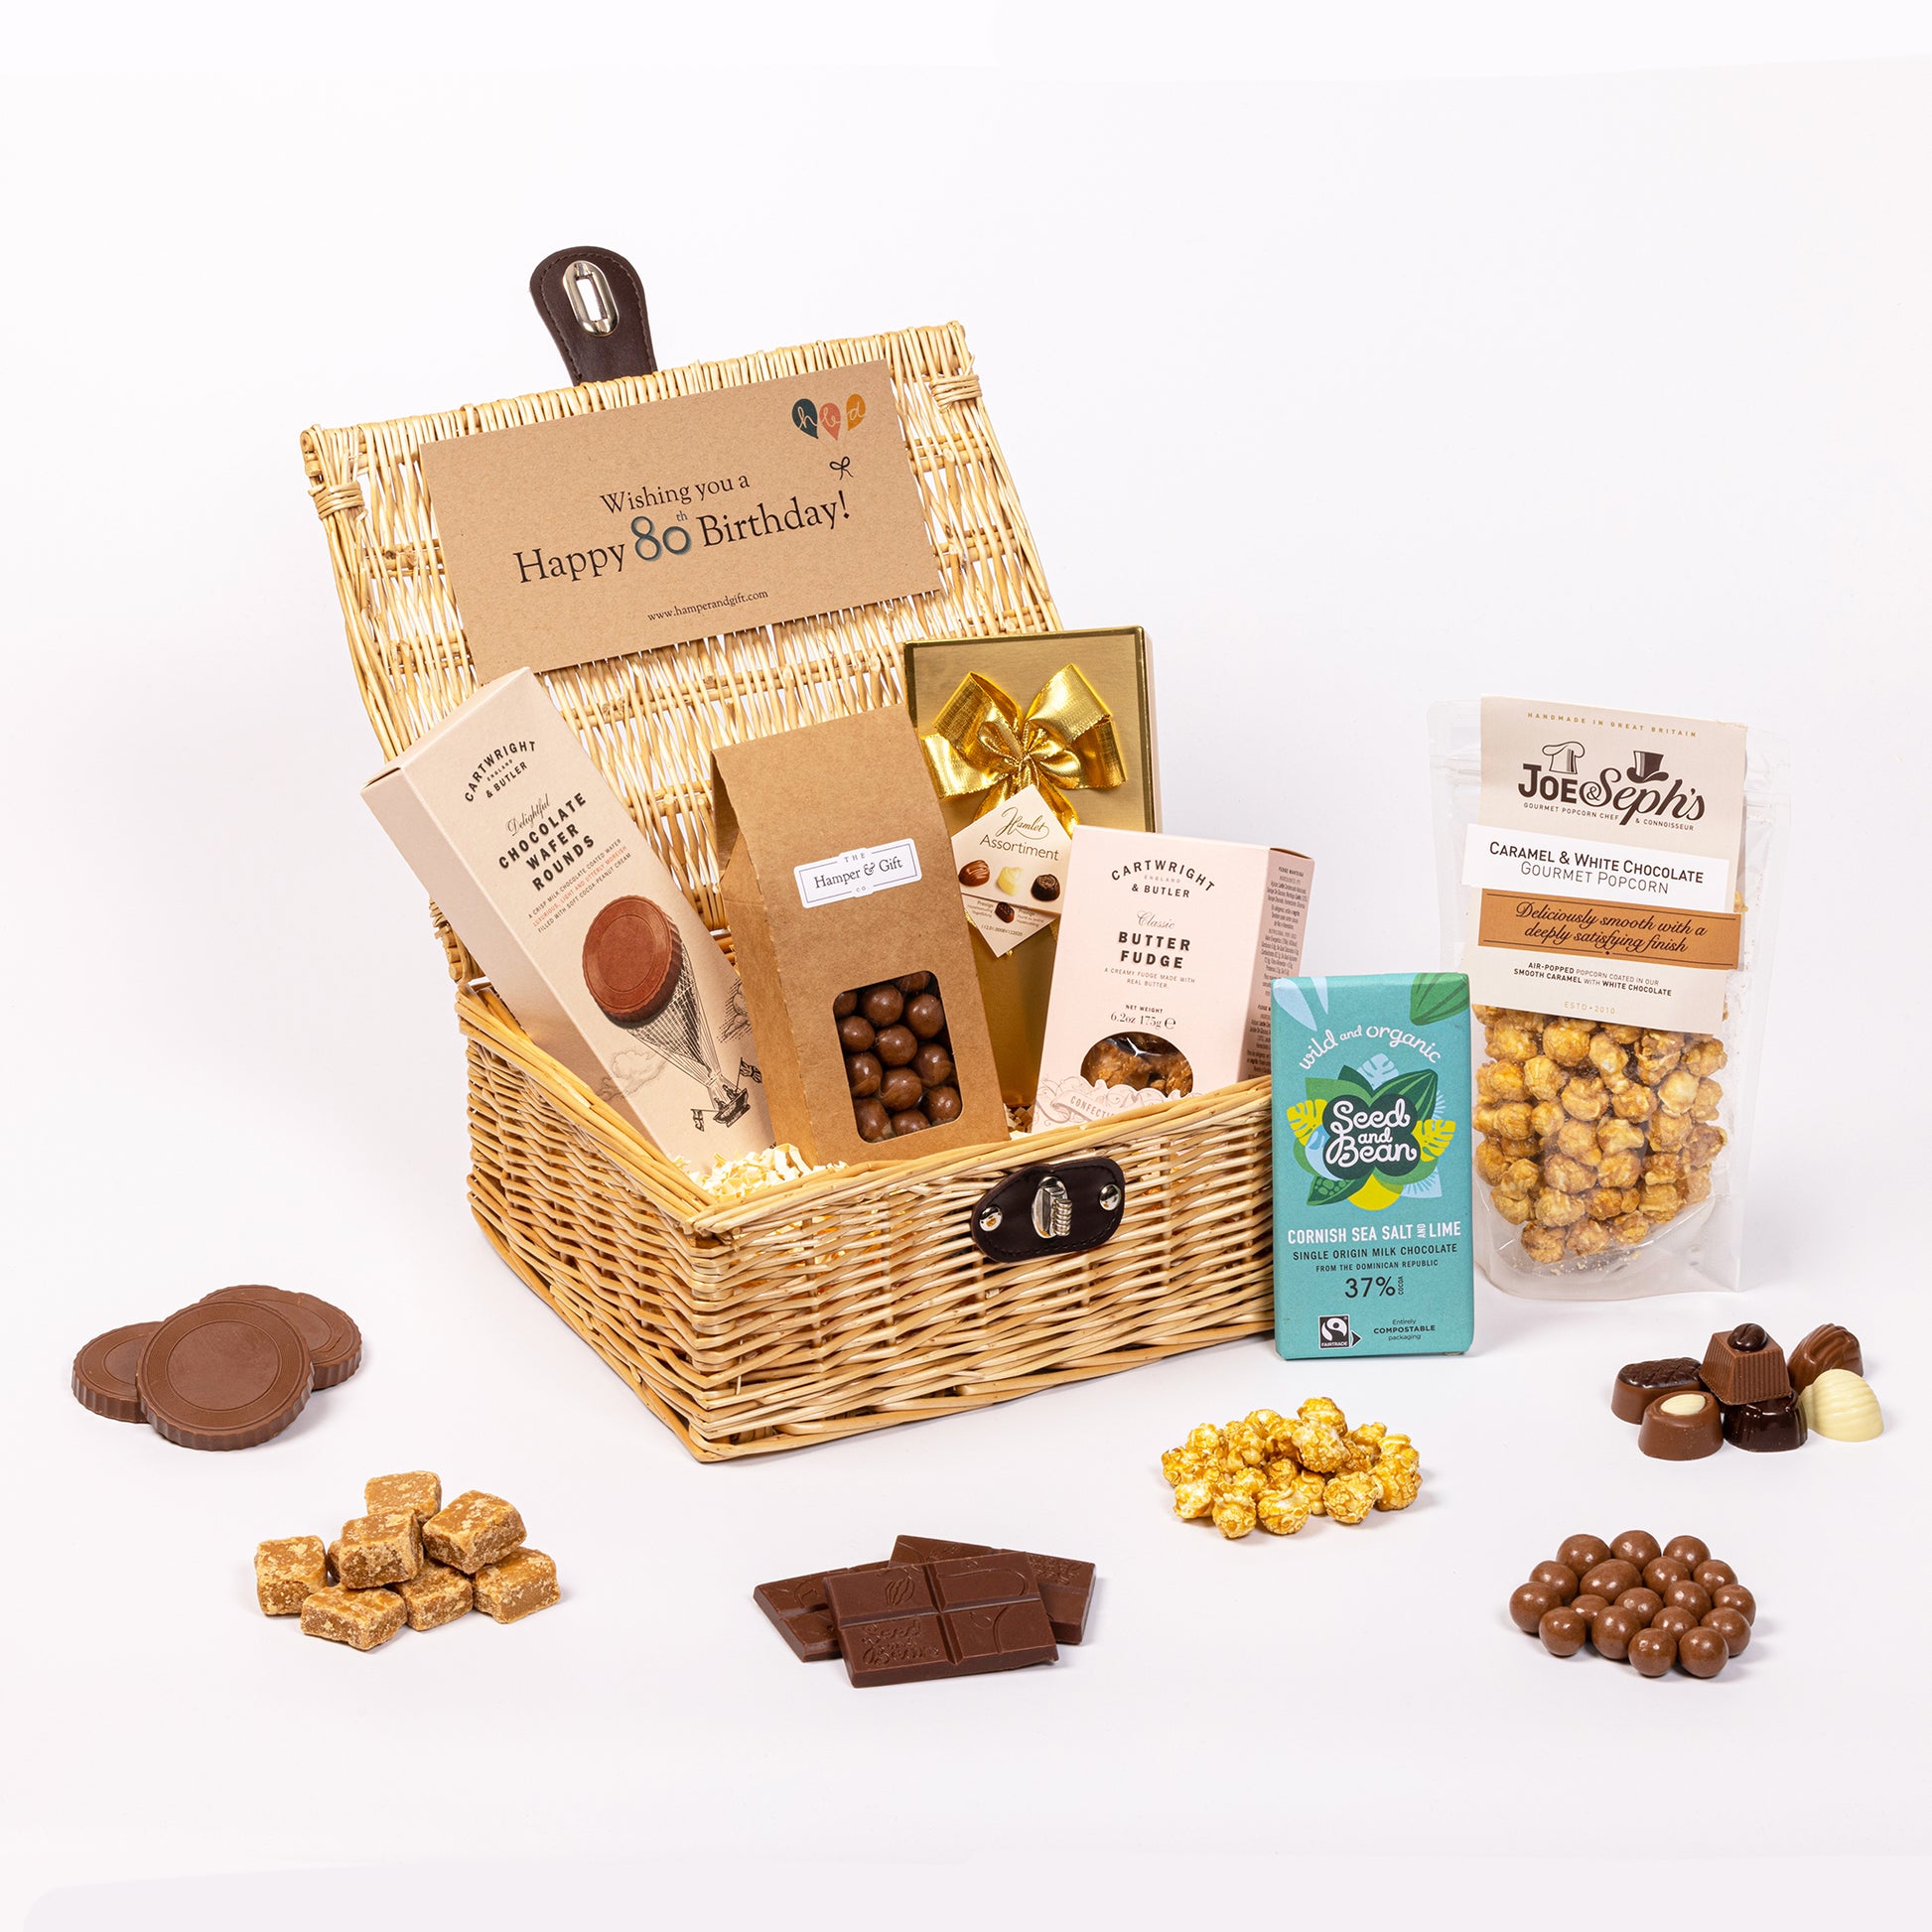 80th Birthday Chocolate & Fudge Hamper filled with a variety of chocolate, fudge, biscuit and gourmet popcorn